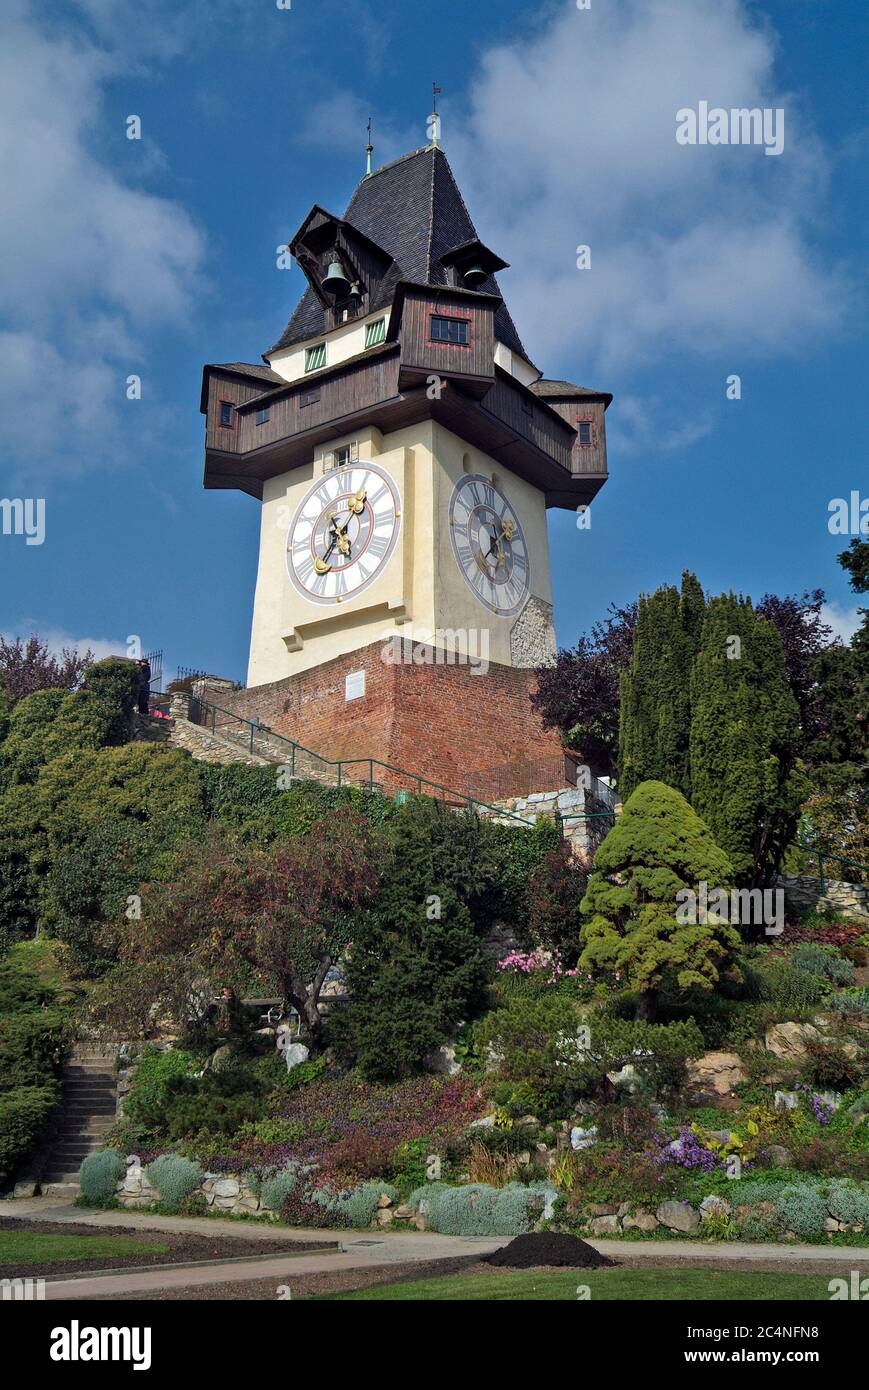 Austria, the medieval clock tower named Uhrturm is located on the top of Schlossberg hill and is the landmark of Graz, the capital of Styria Stock Photo